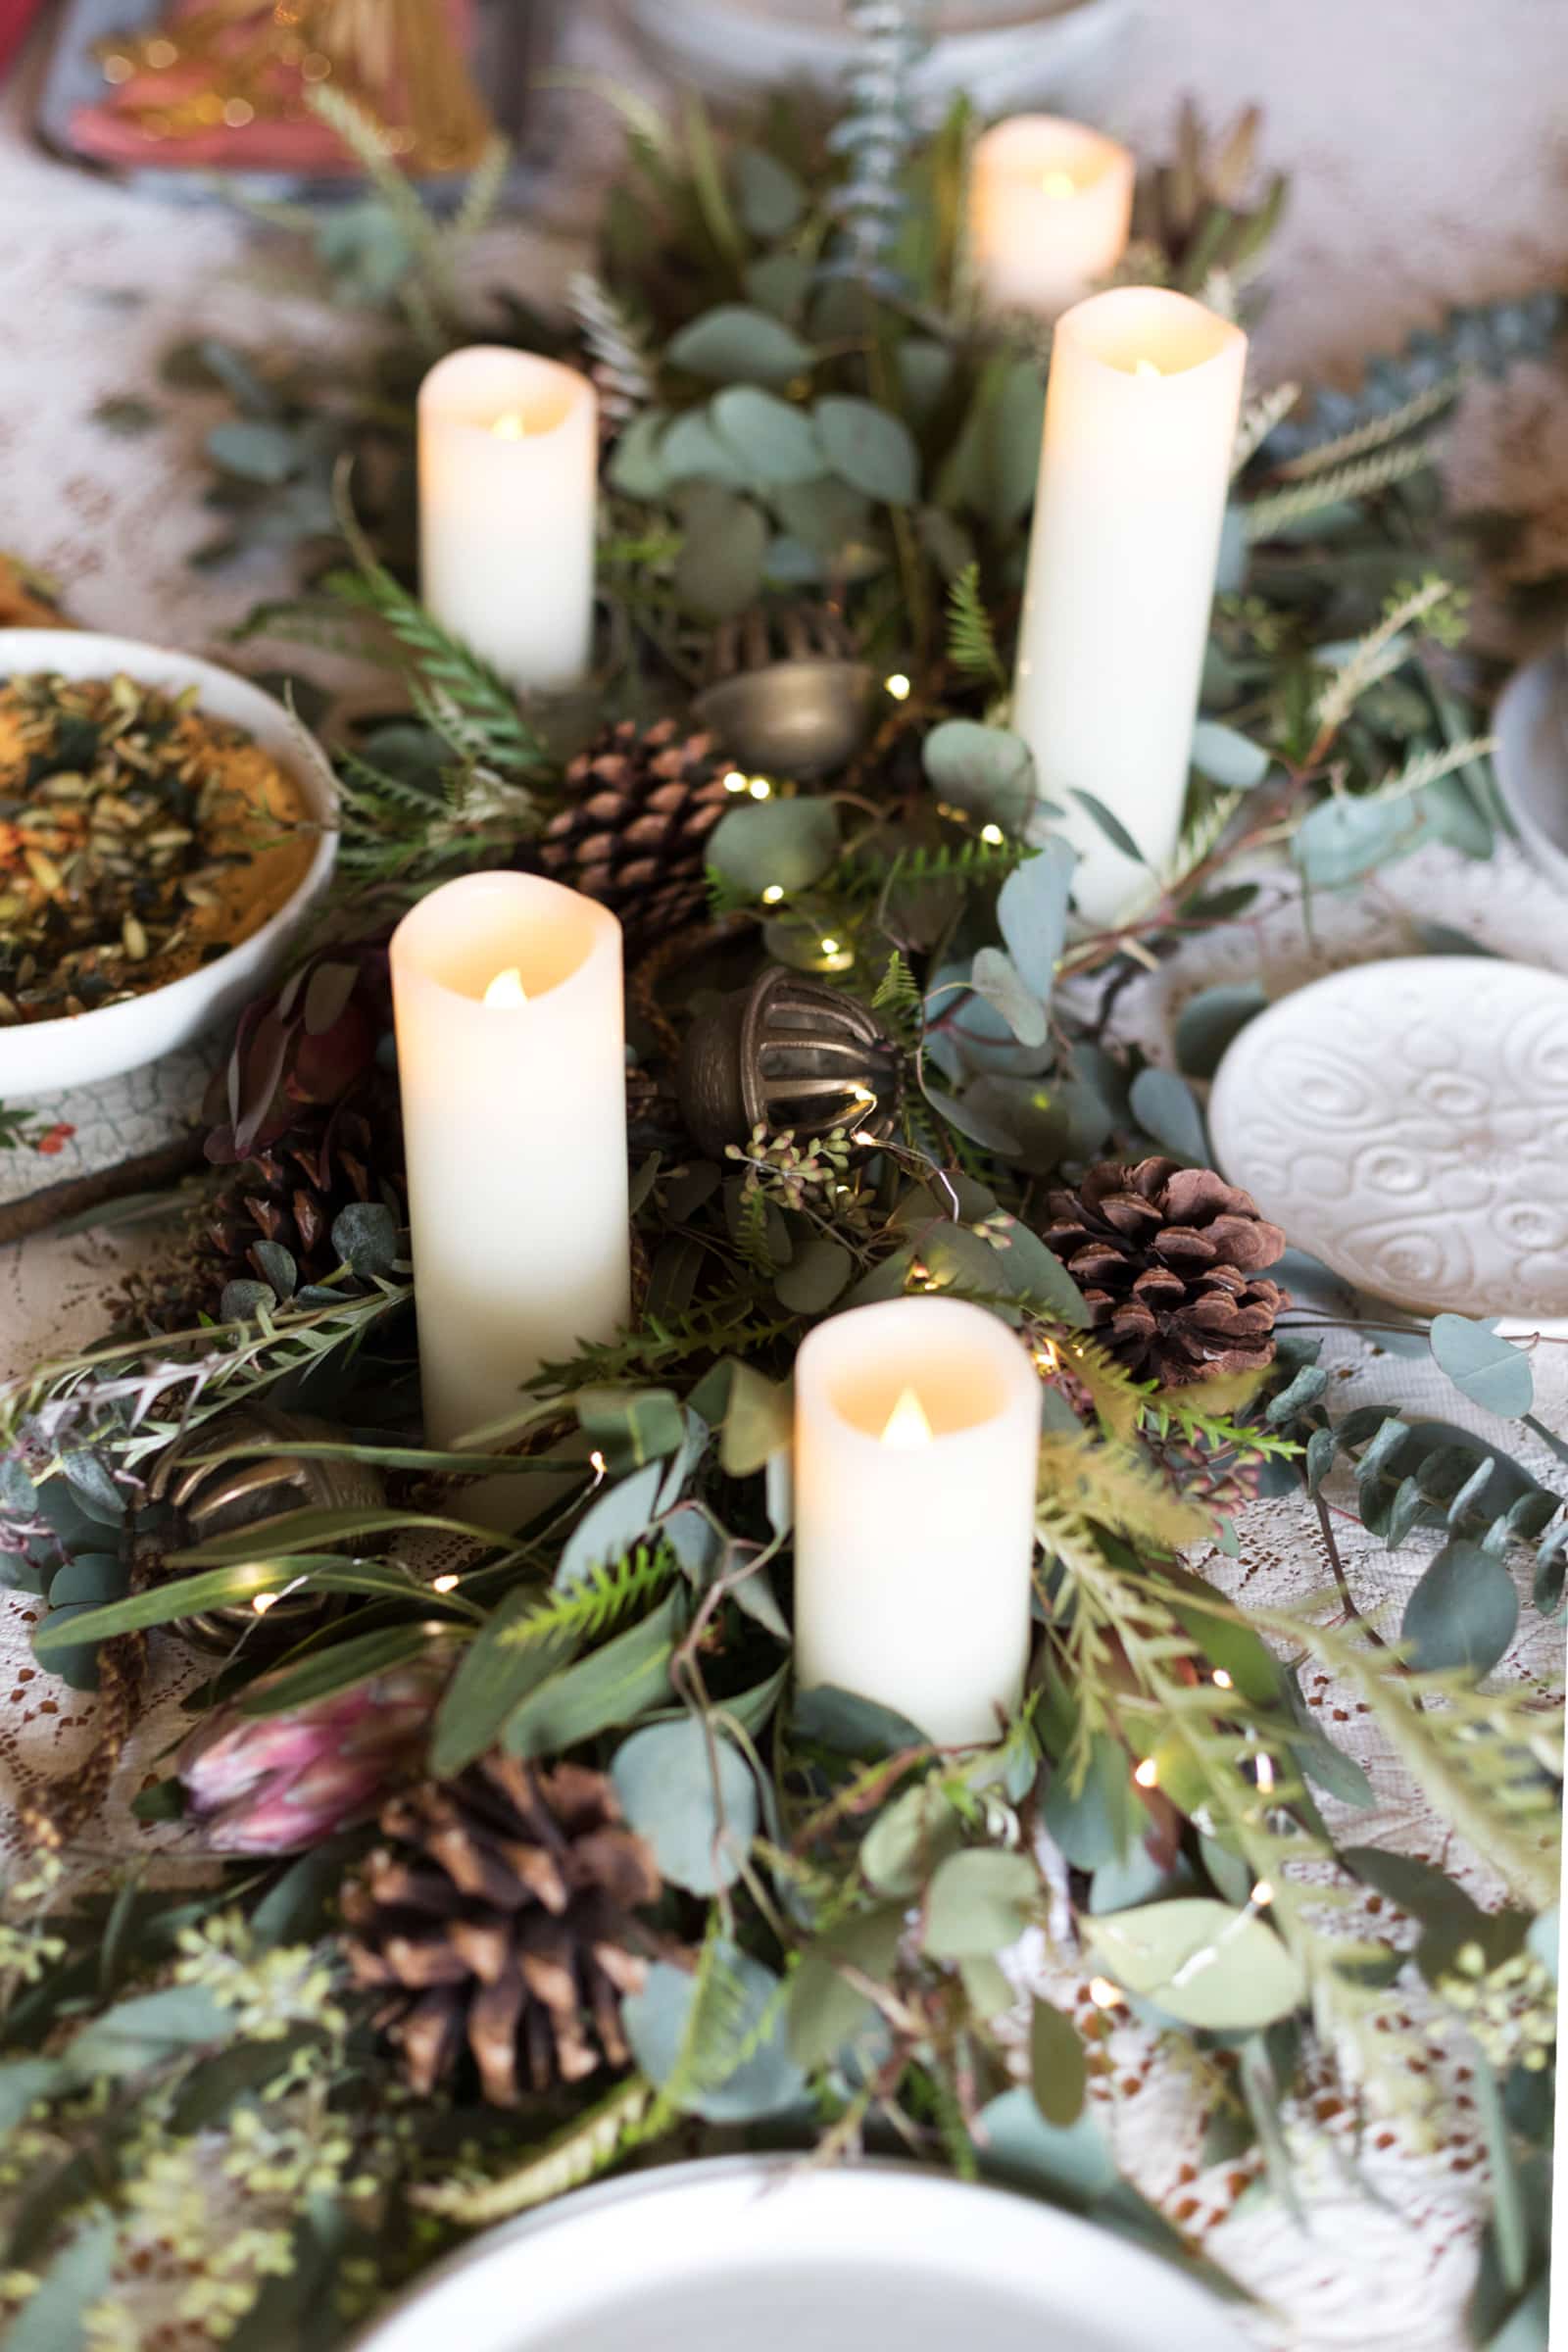 How To Build A Holiday Floral Centerpiece @saltandwind